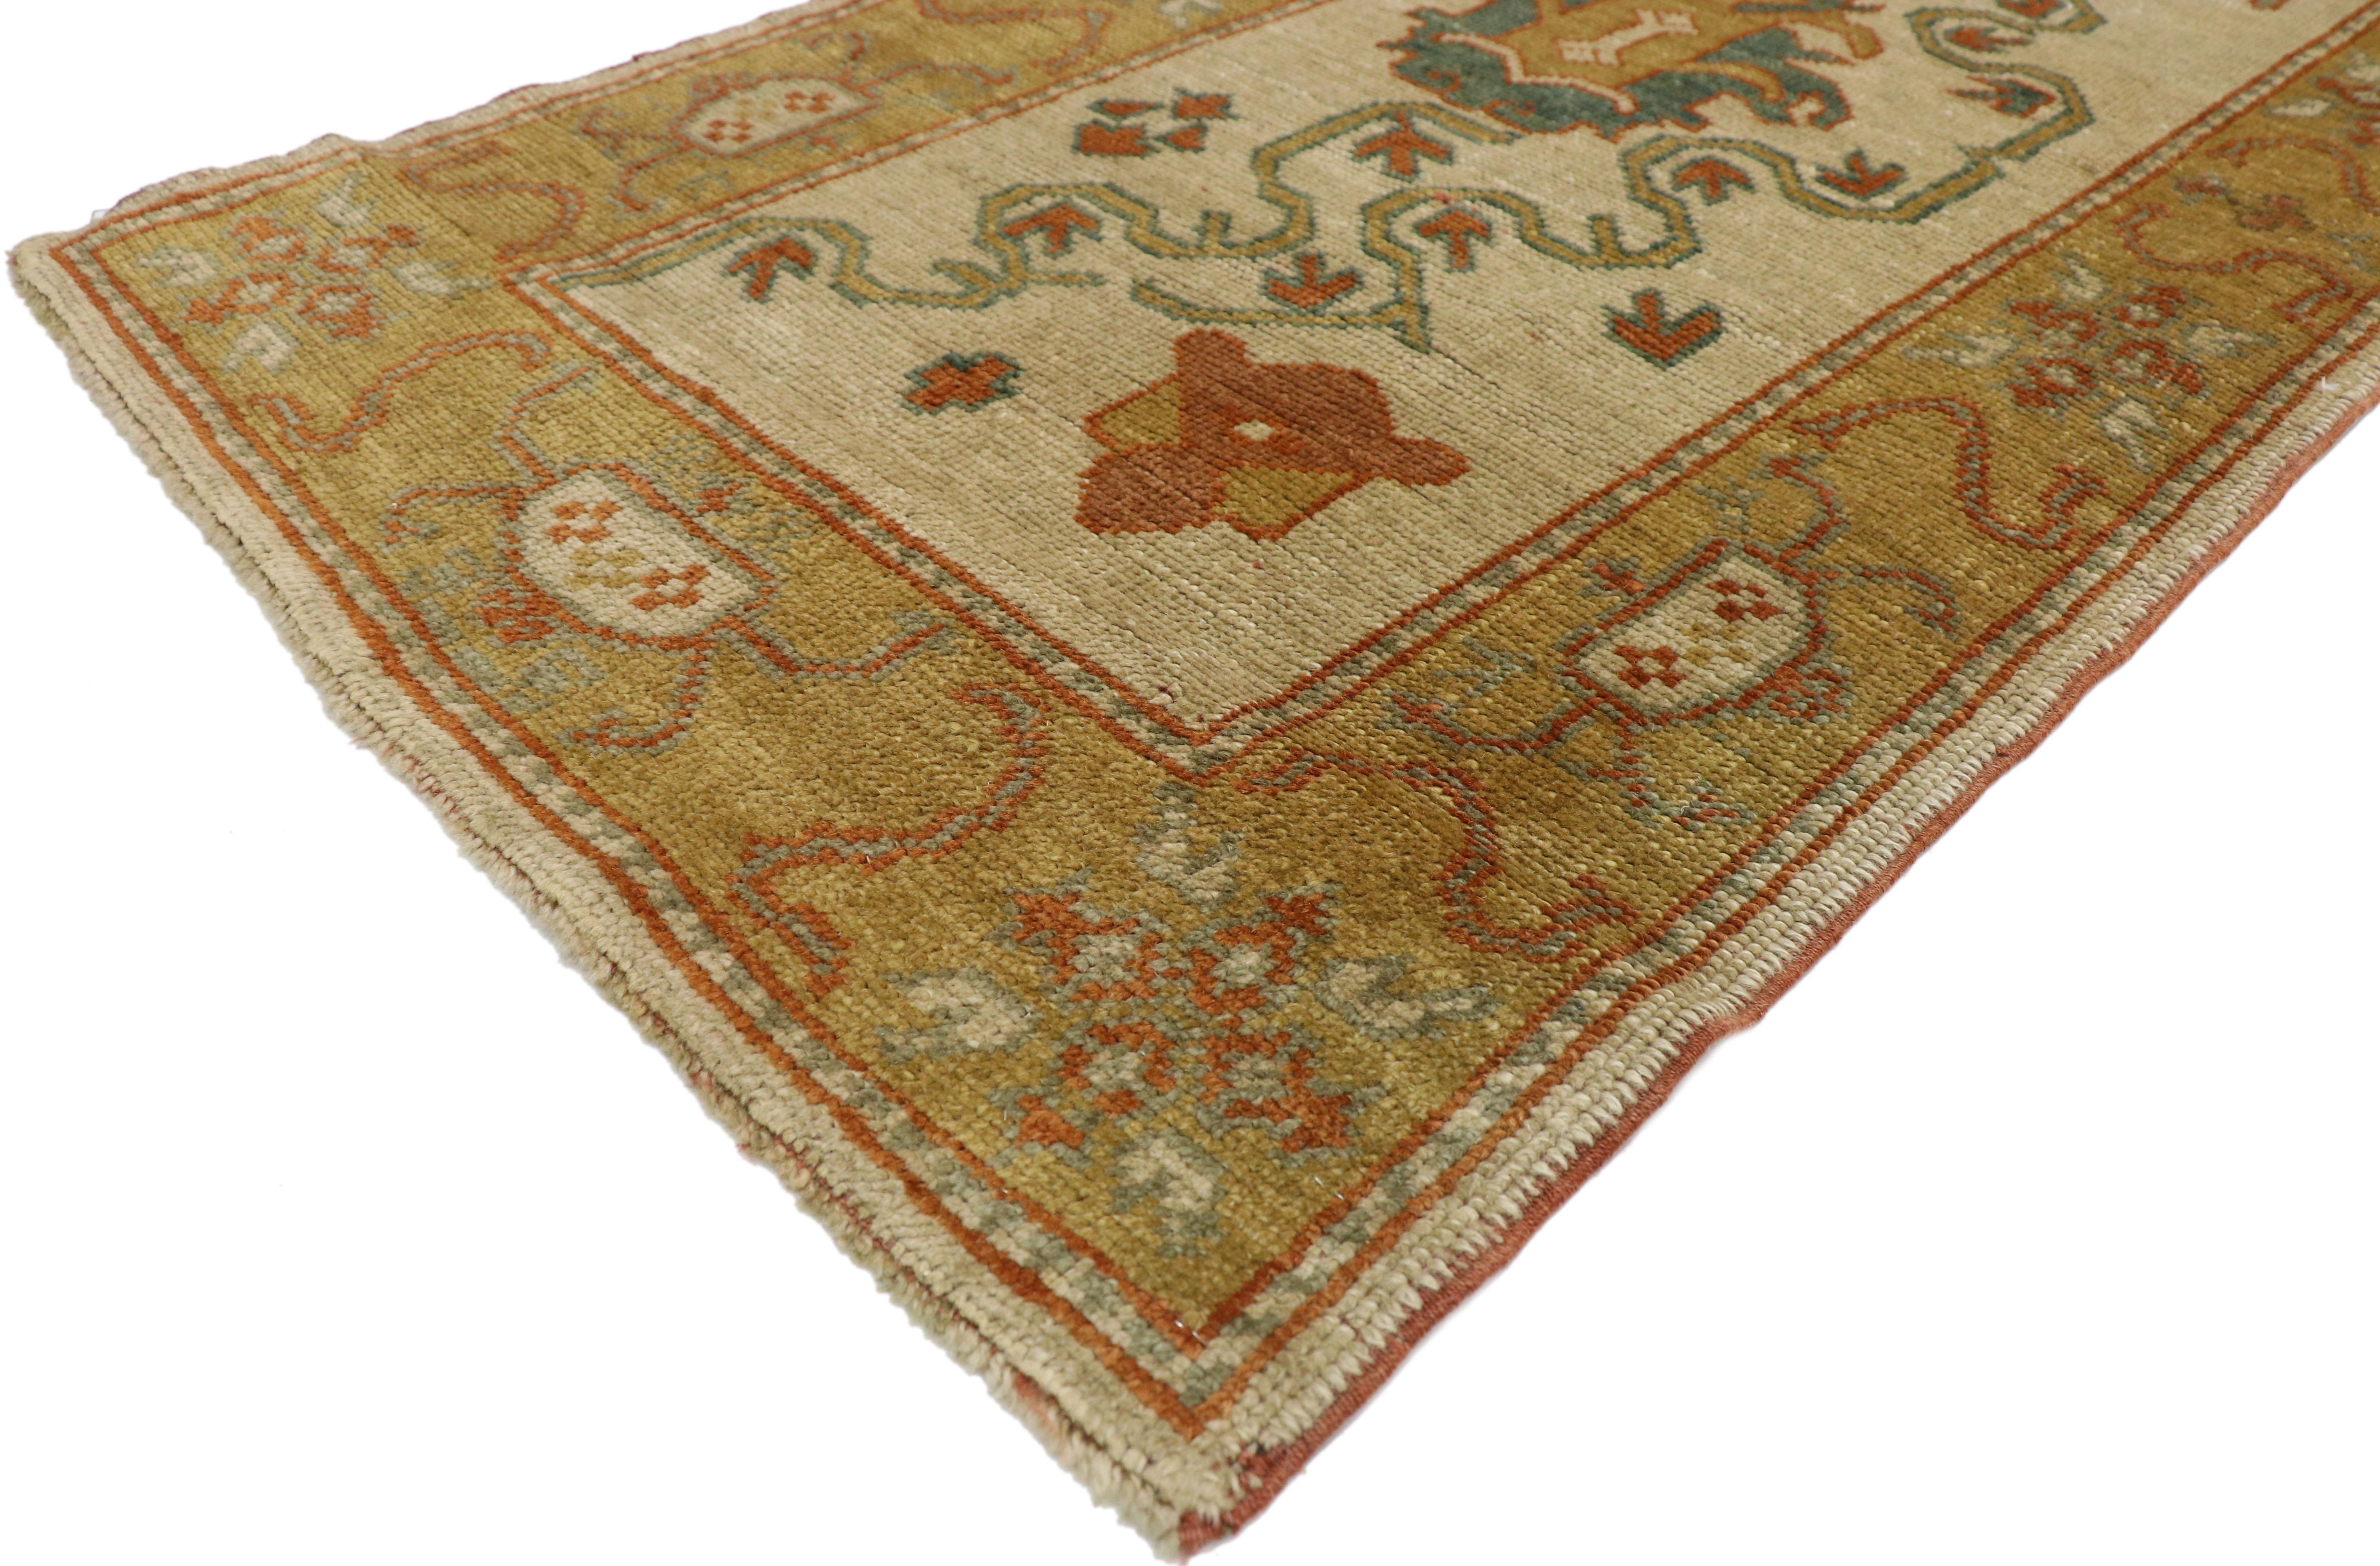 74237, transitional style Turkish Oushak runner. This hand-knotted wool transitional style Turkish Oushak hallway runner can make an interior space feel warm and welcoming yet elegantly understated. Featuring a central design composed of long green